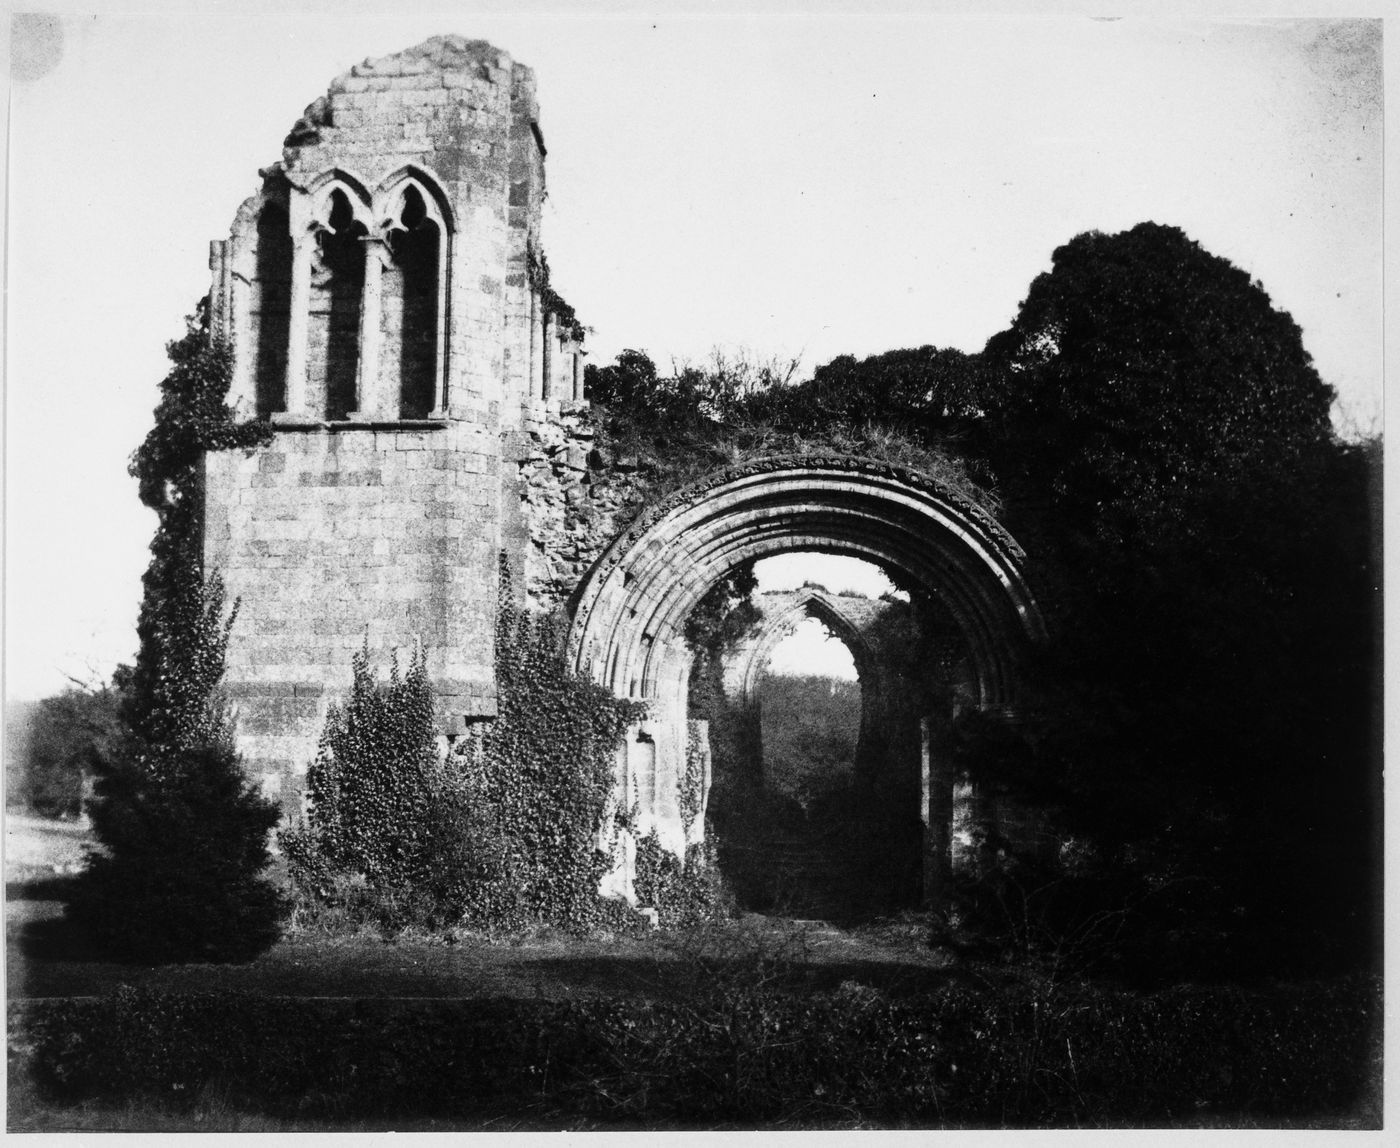 View of Lilleshall Abbey ruins, Shropshire, England